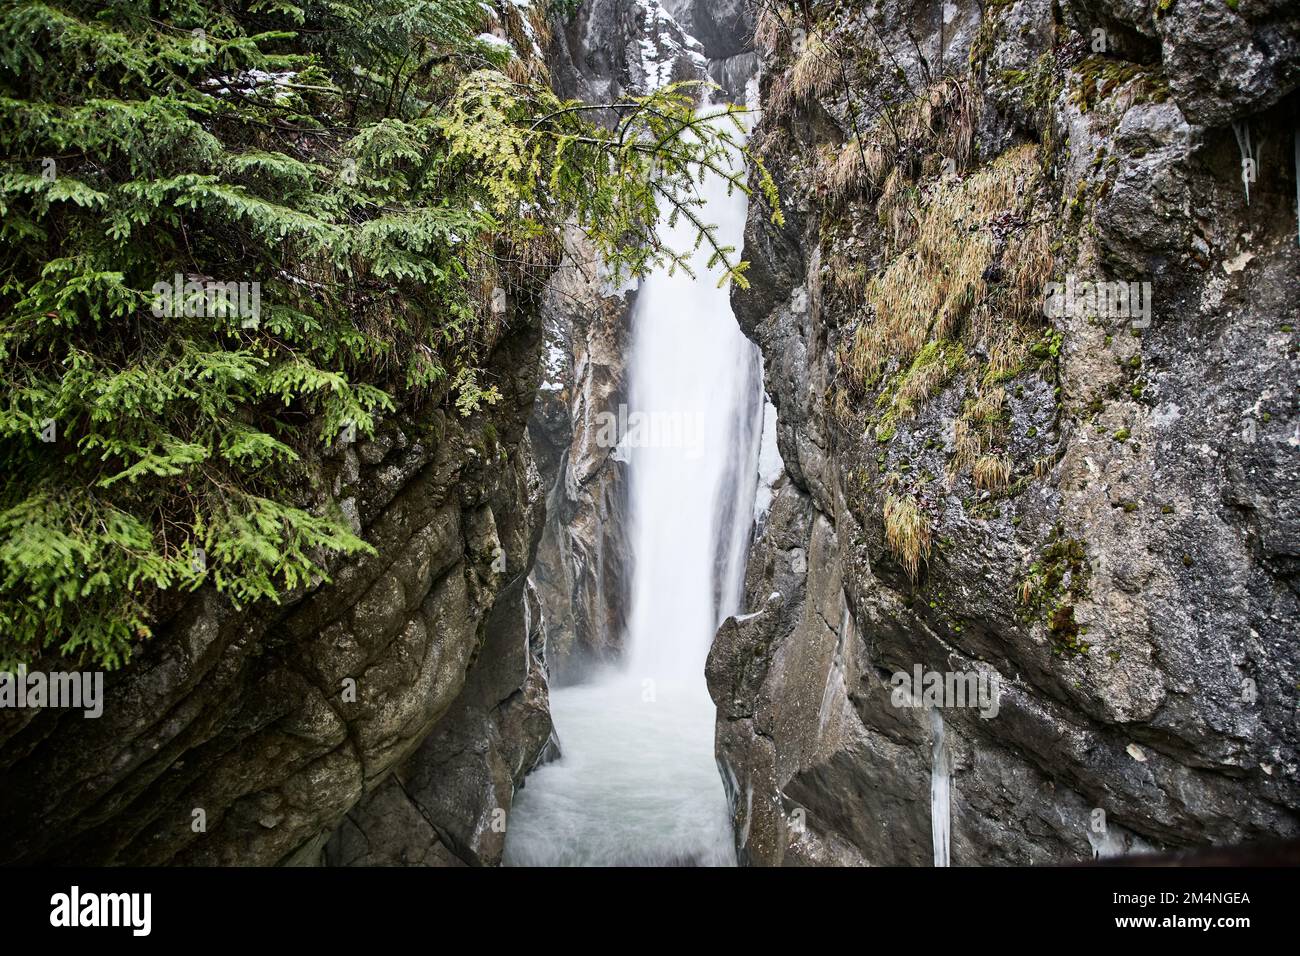 A scenic view of the beautiful Tatzelwurm waterfall found in Bavaria, Germany Stock Photo